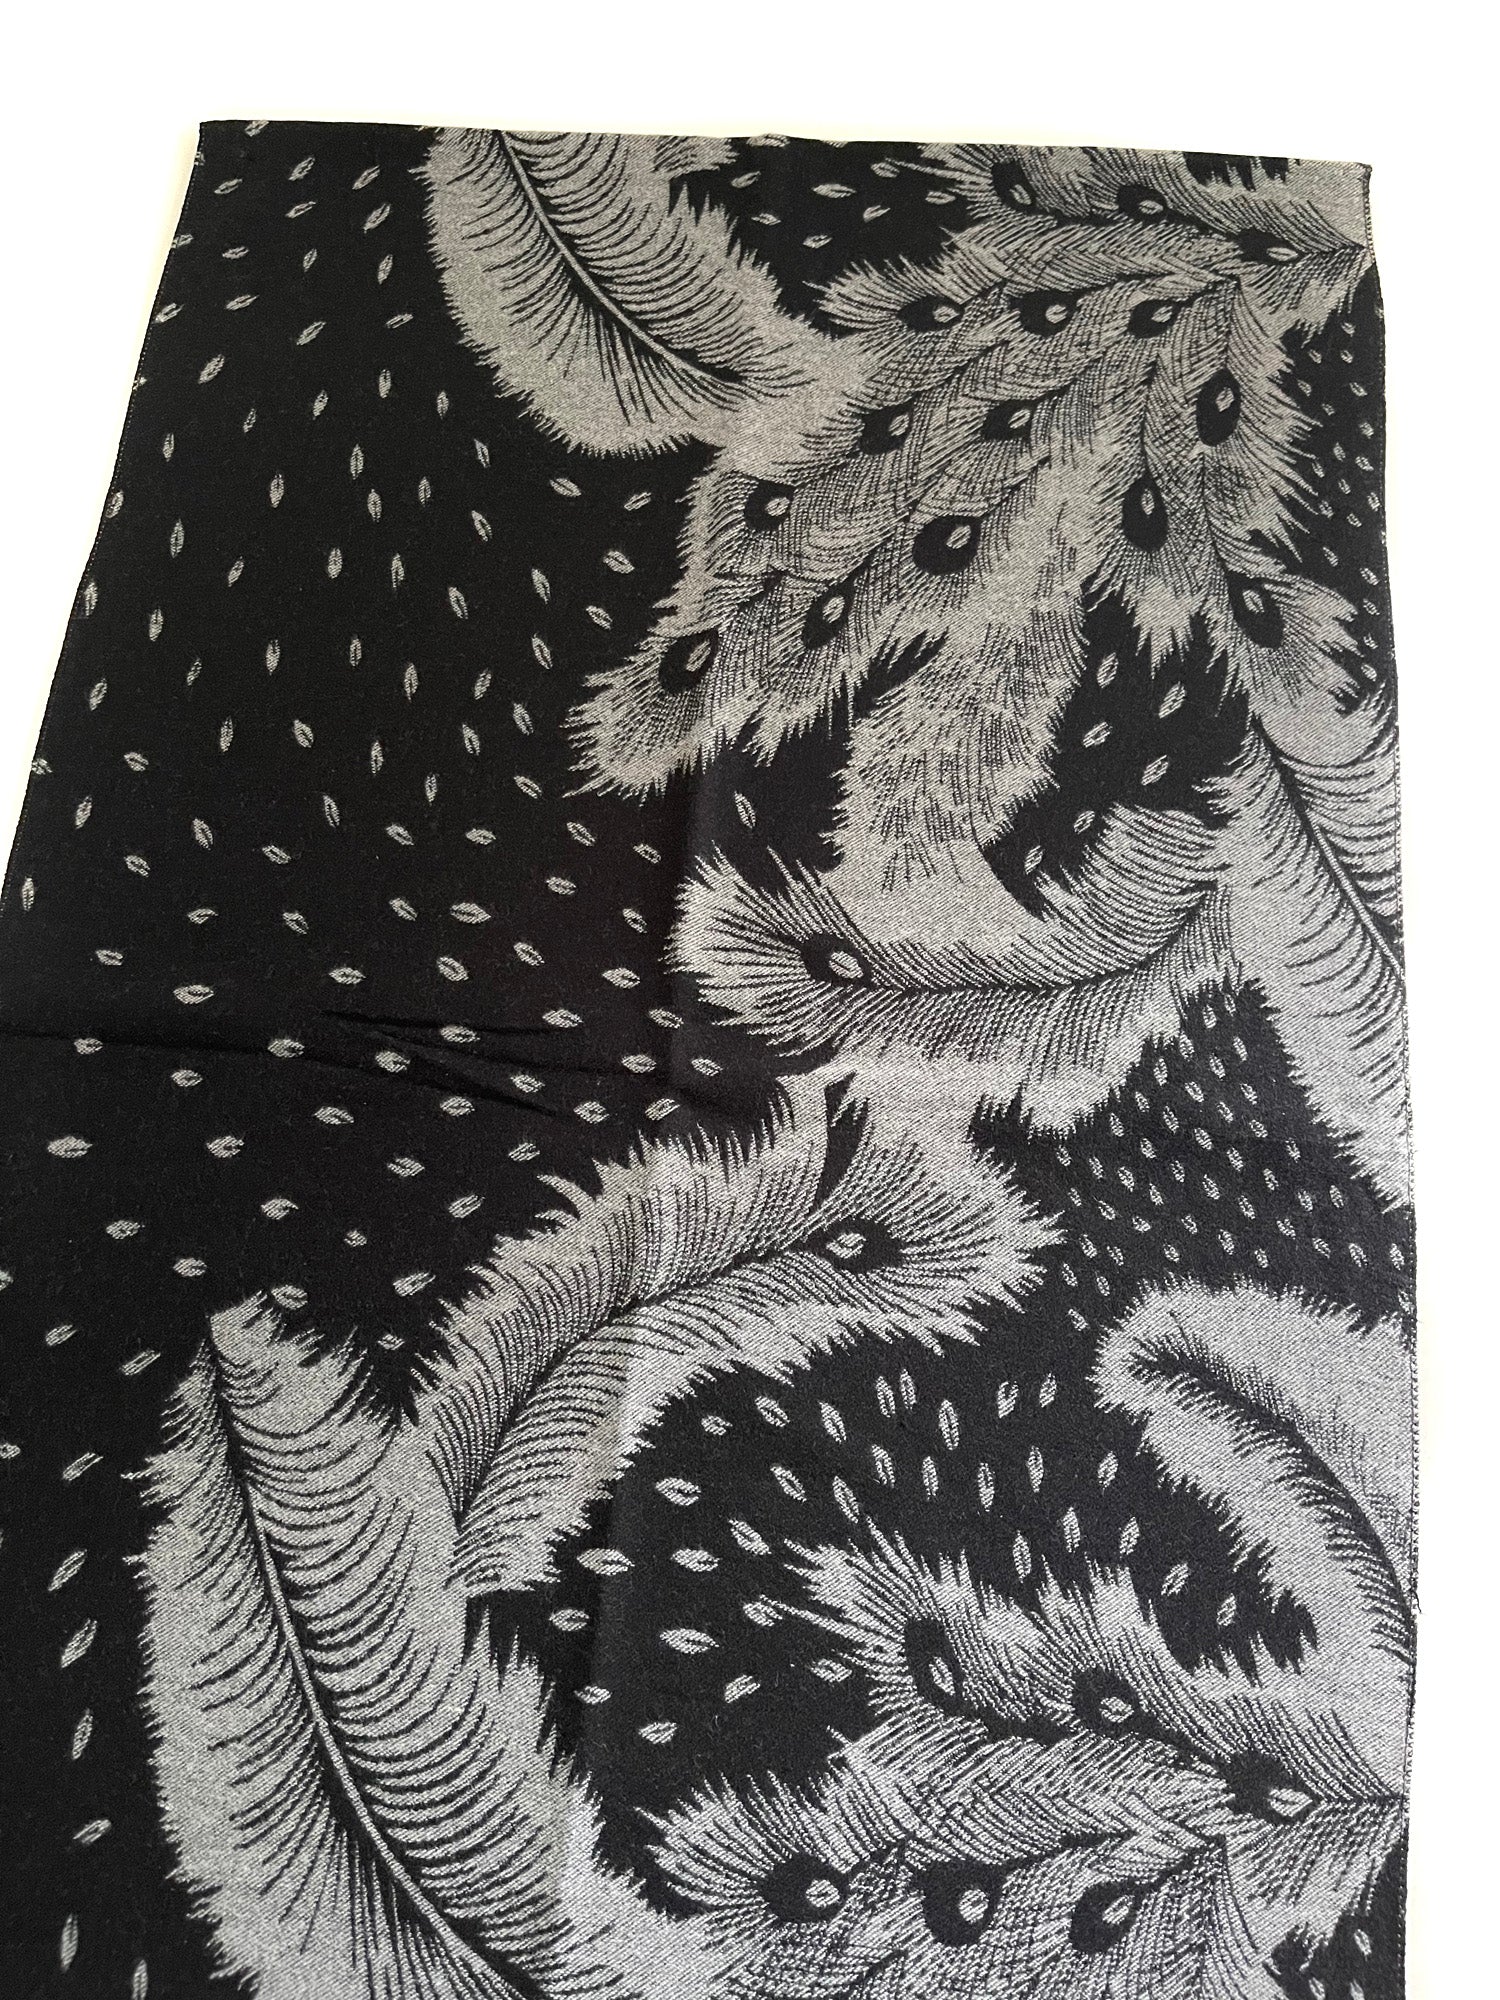 LARGE BLACK CASHMERE FEATHER PRINT REVERSIBLE WINTER SHAWL BLANKET SCARF